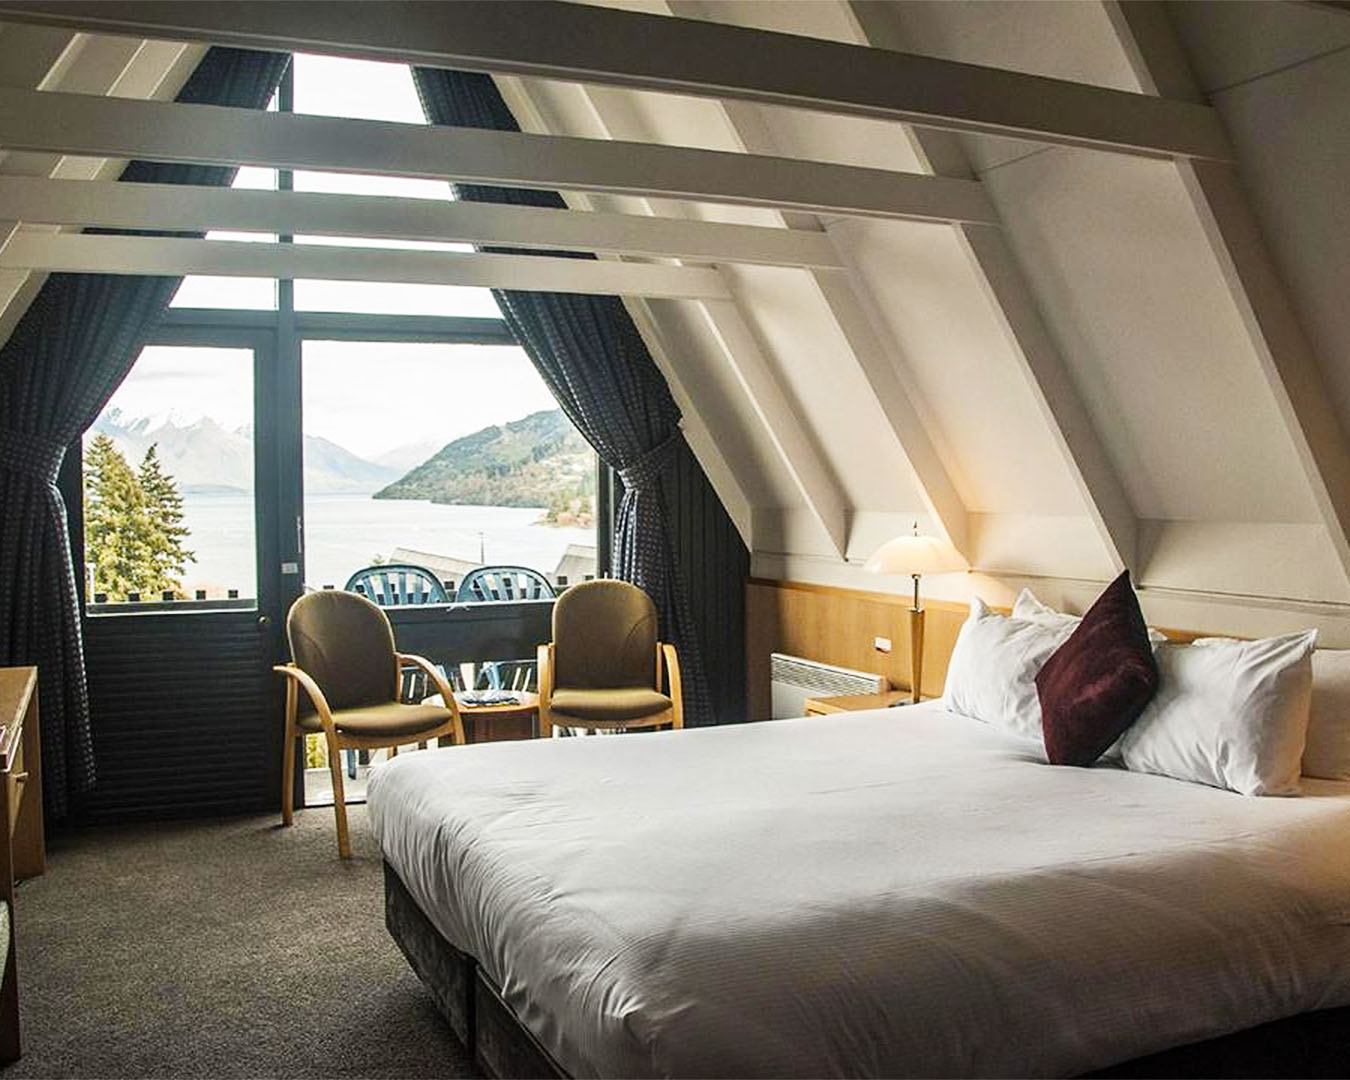 A bedroom in the eaves at the Heartland Hotel in Queenstown.